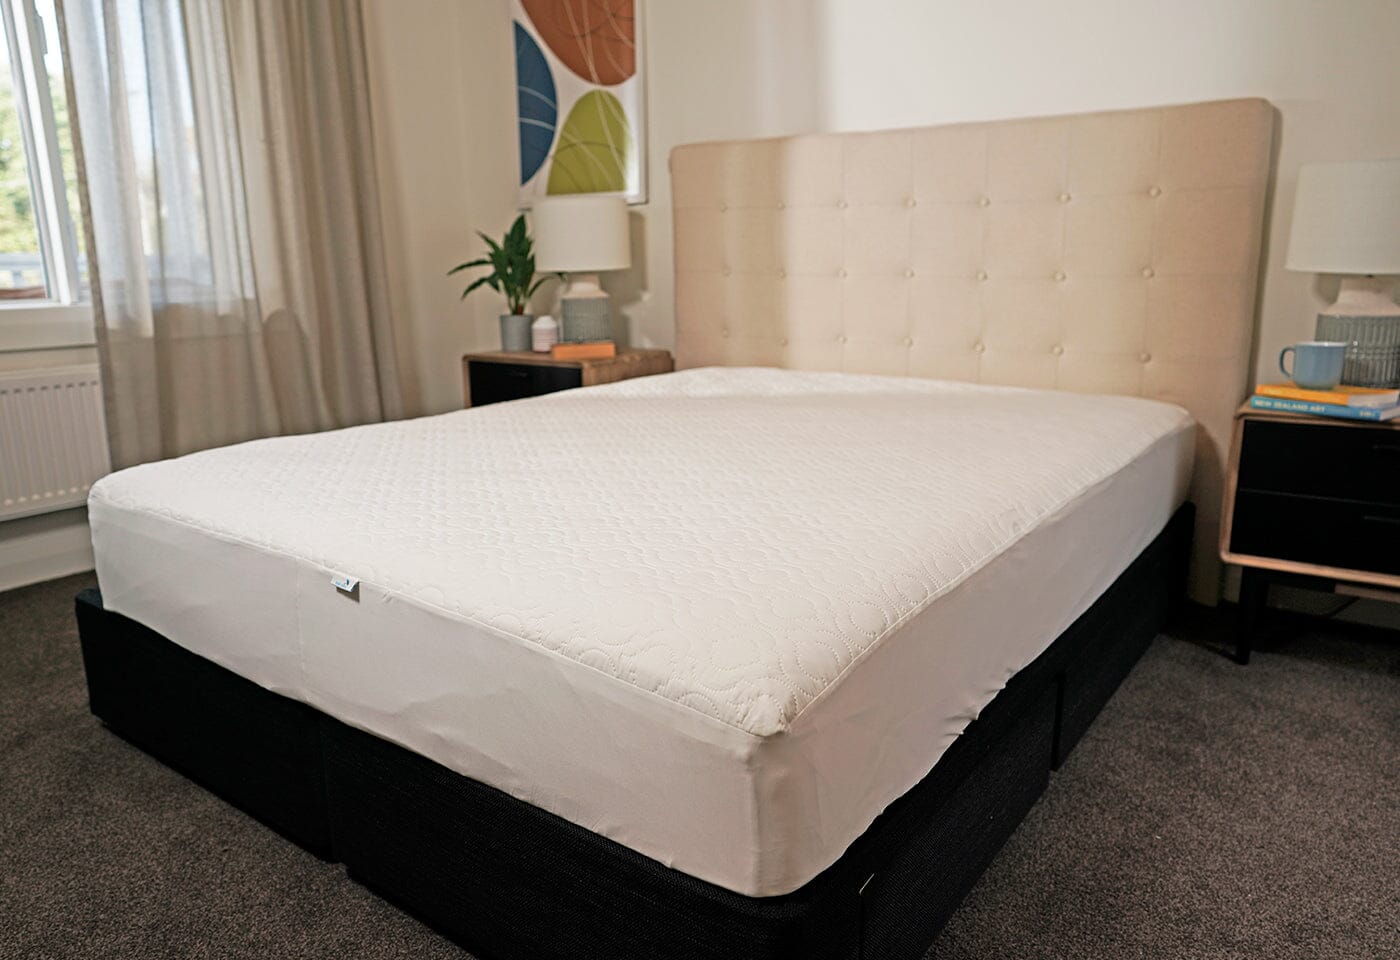 Mattress Protector Quilted - Brolly Sheets AU